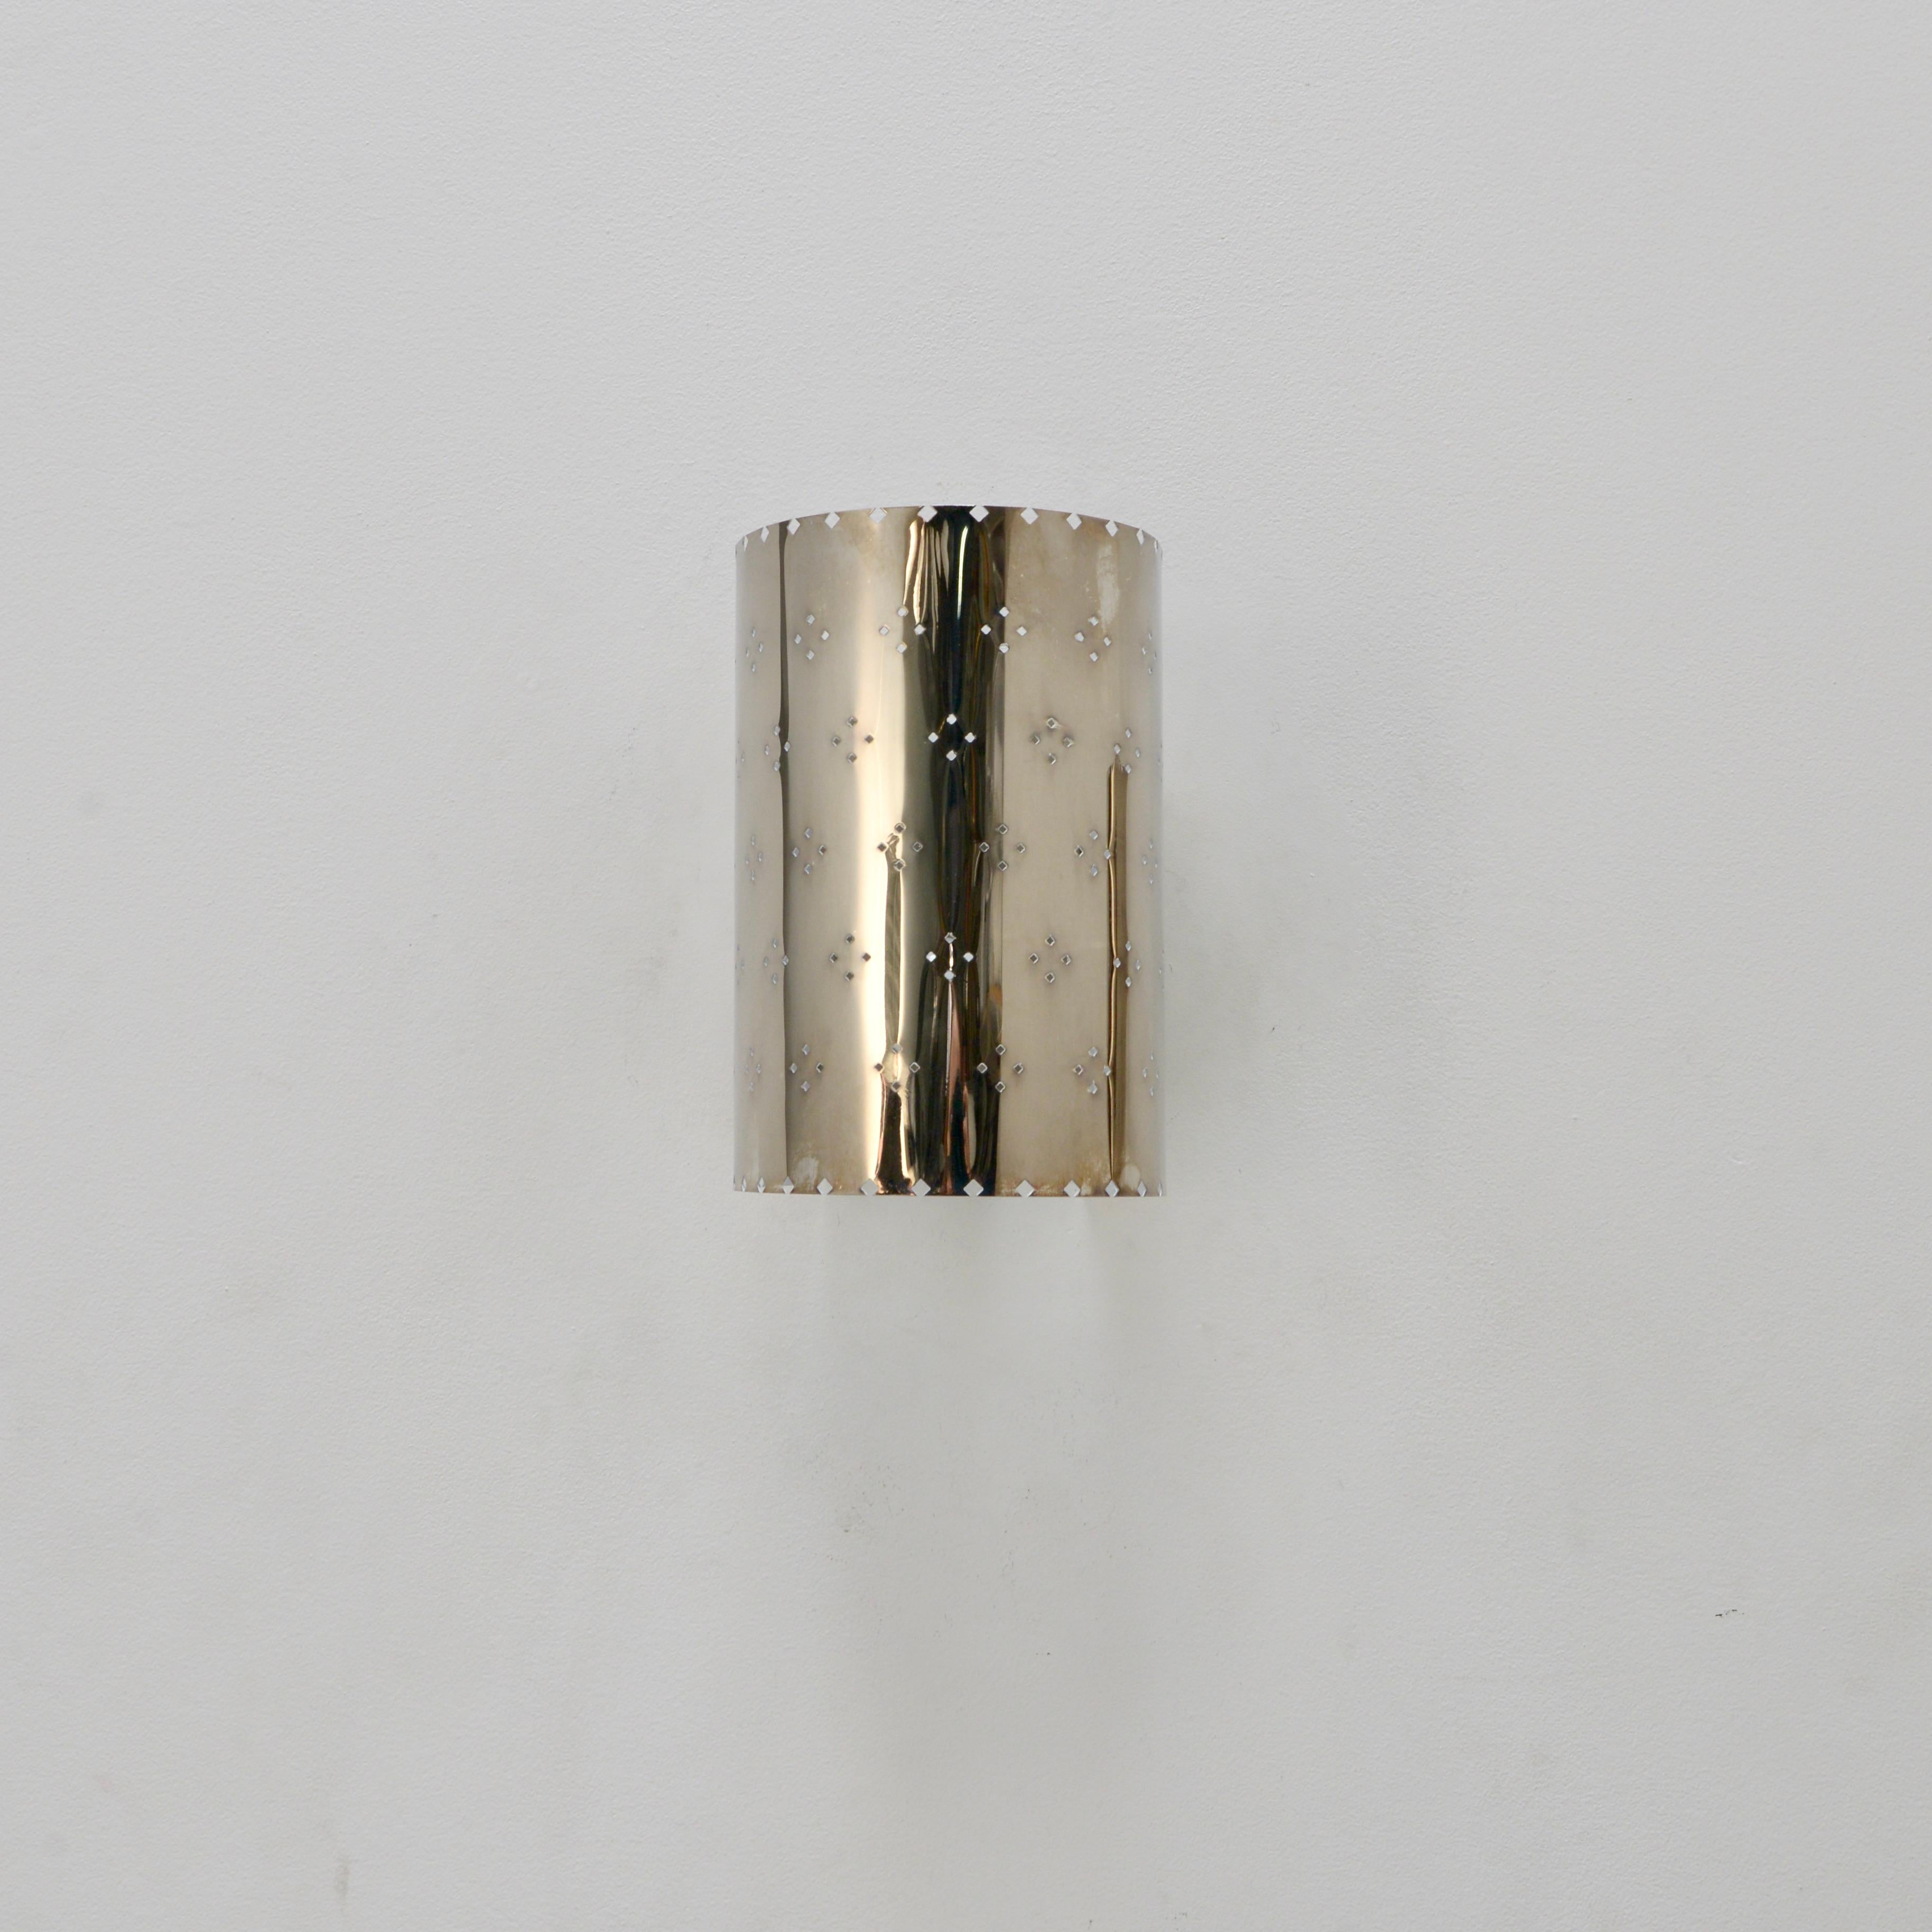 Handsome LU Louis sconce AS. An all brass wall sconce in an aged silver finish with patterned perforations by Lumfardo Luminaires. Made contemporary in the US. Multiples available for order. Can be wired for use anywhere in the world. (2) E26 medium